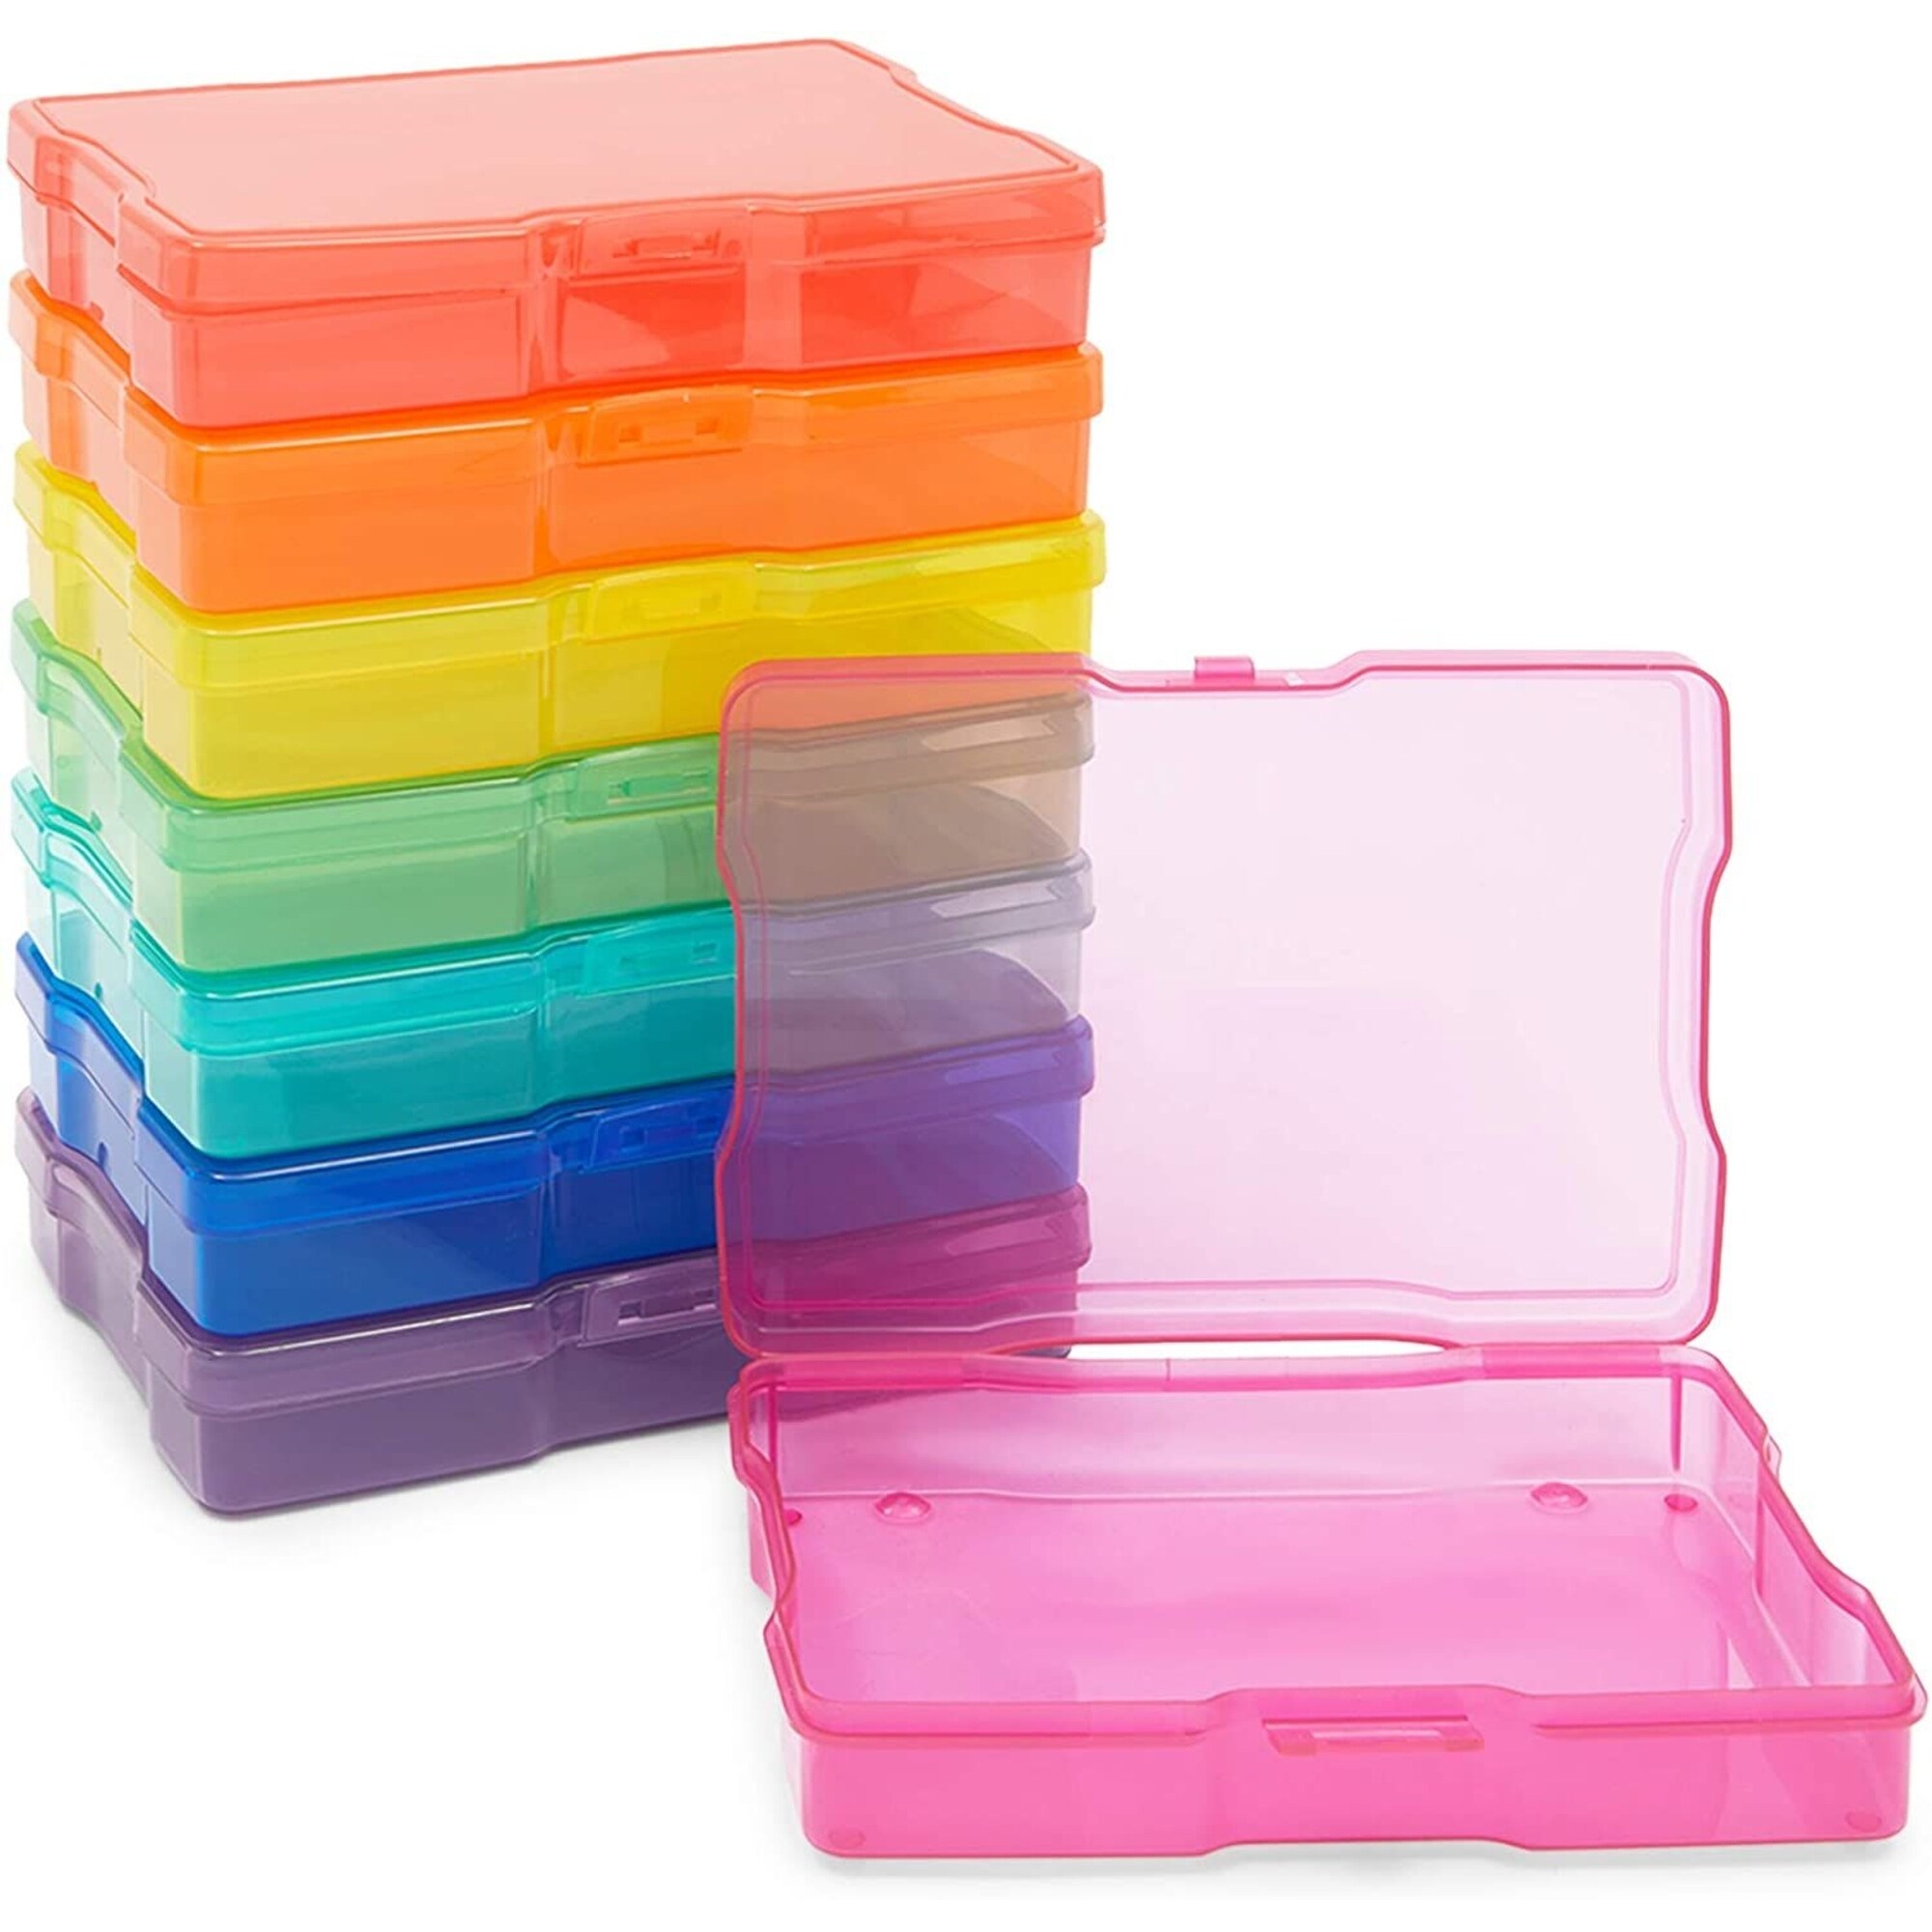 4 x 6 inch Photo Storage Box with 16 Inner Cases (17 Pieces)